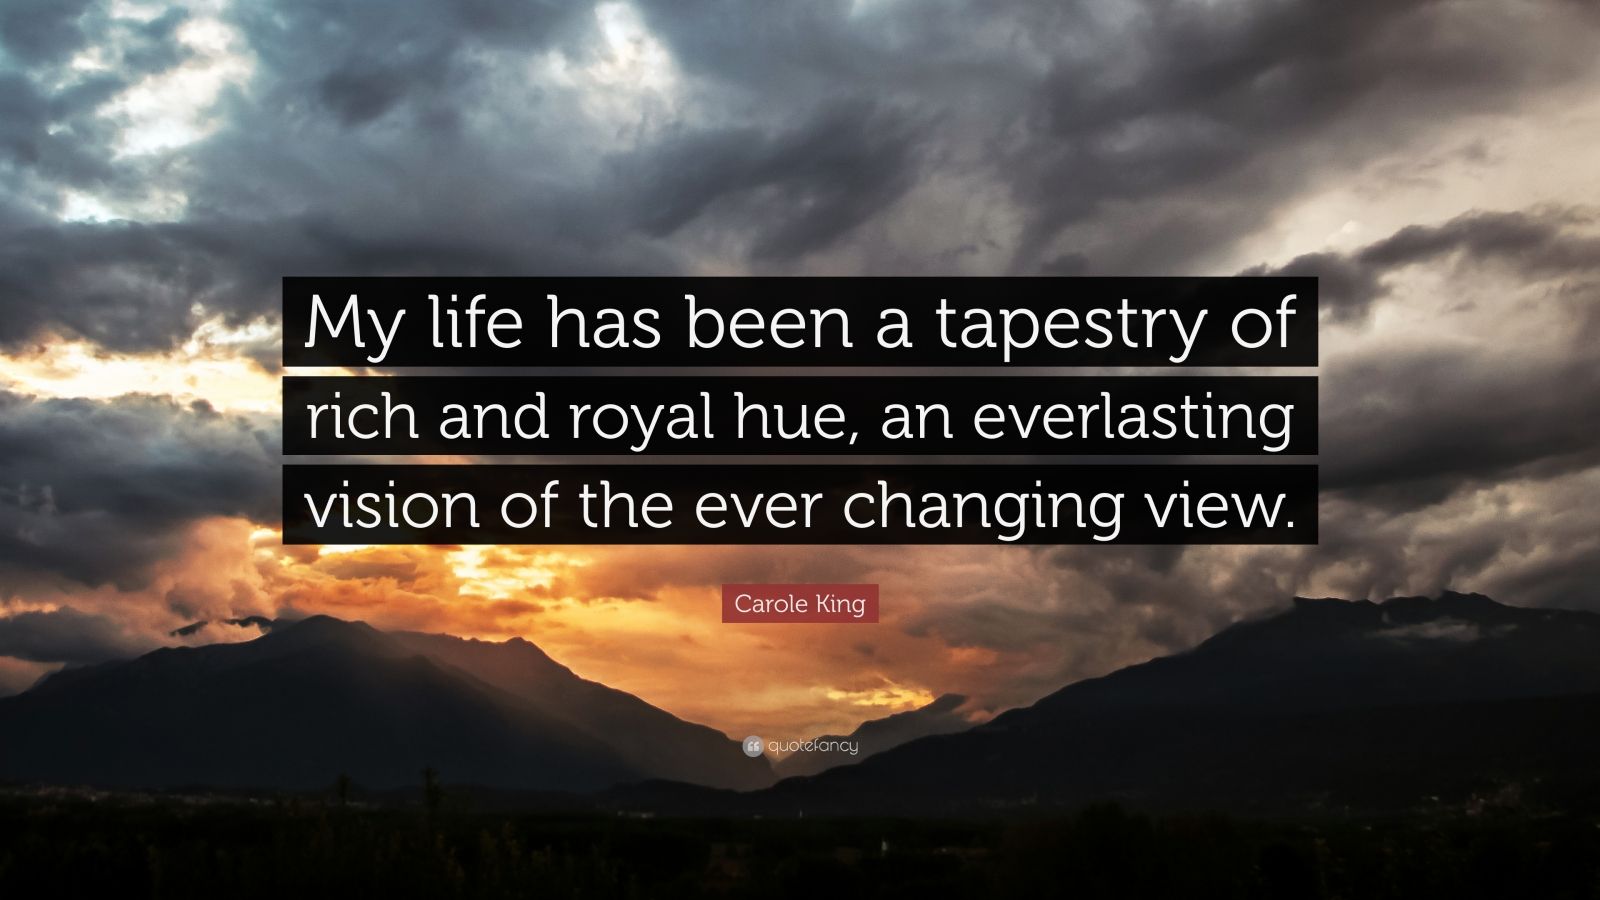 Carole King Quote: “My life has been a tapestry of rich and royal hue